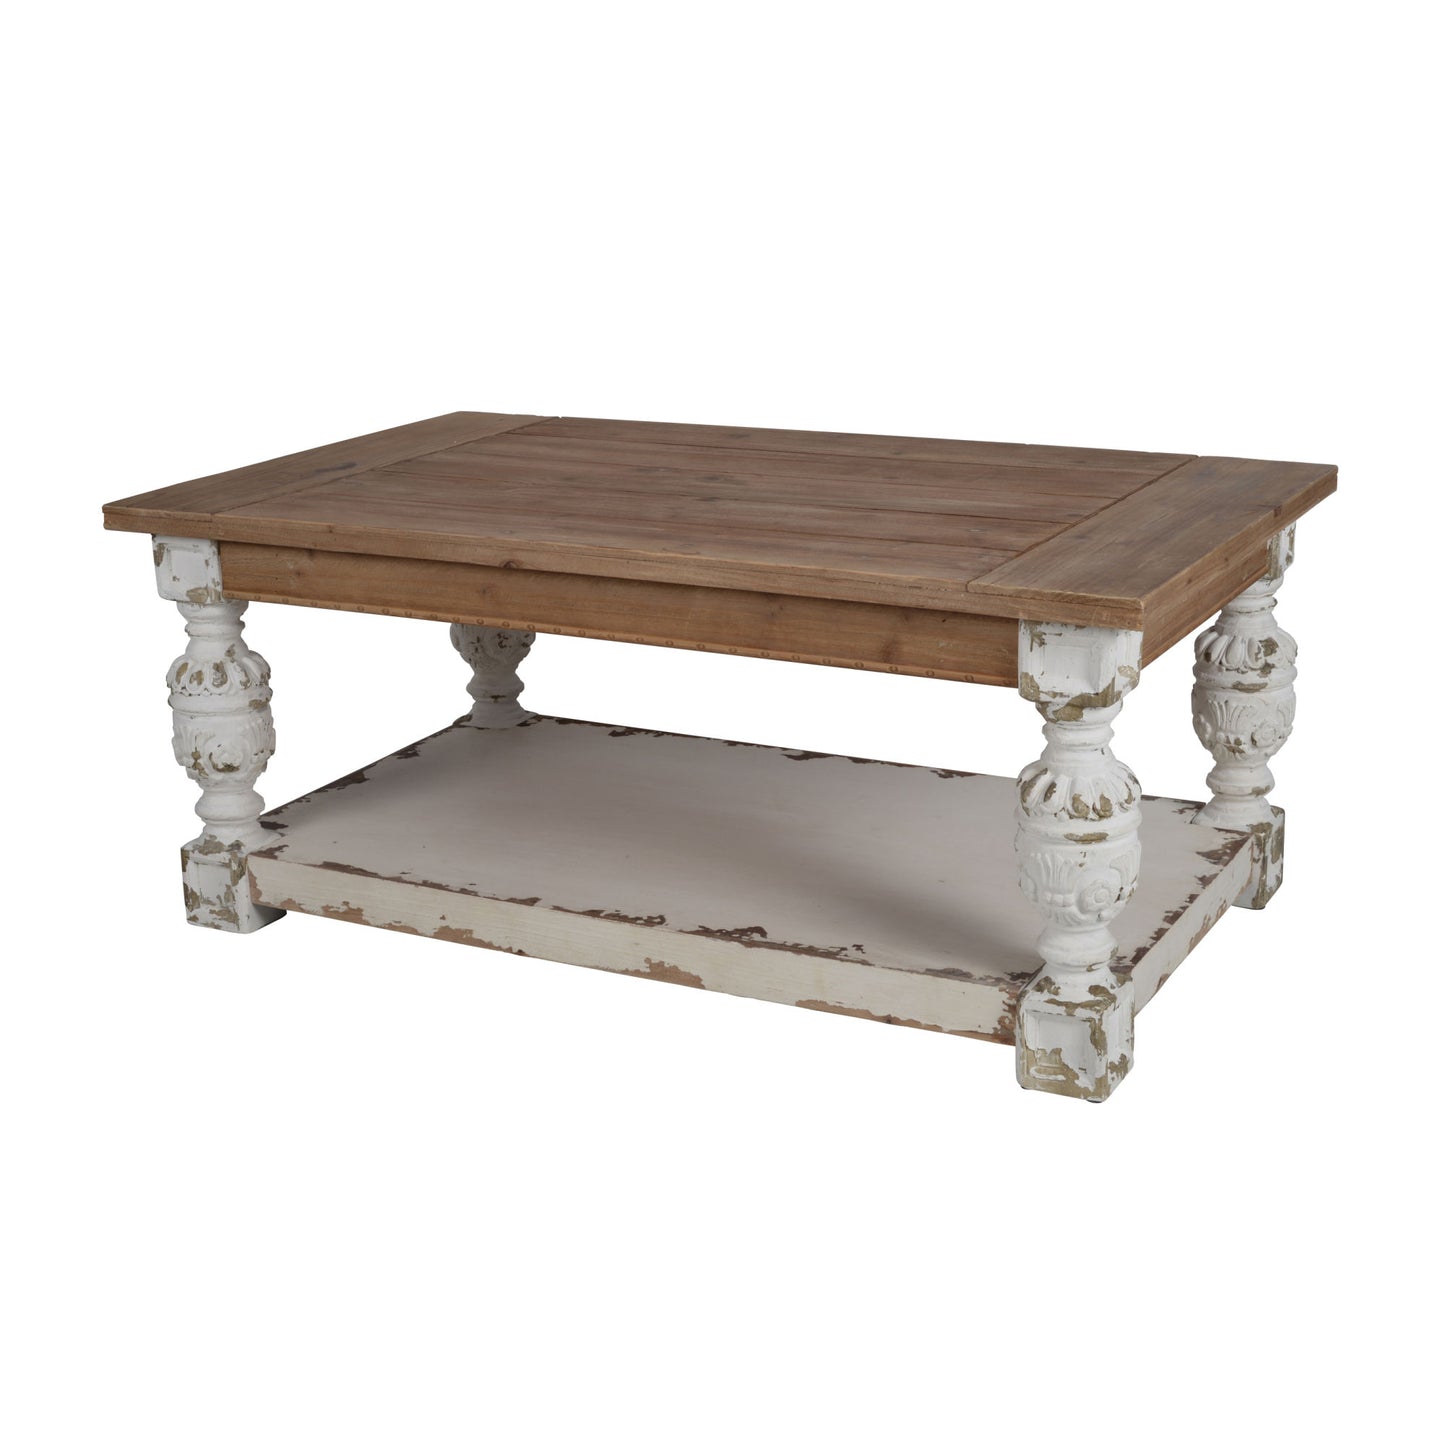 Wooden Coffee Table, French Country Coffee Table